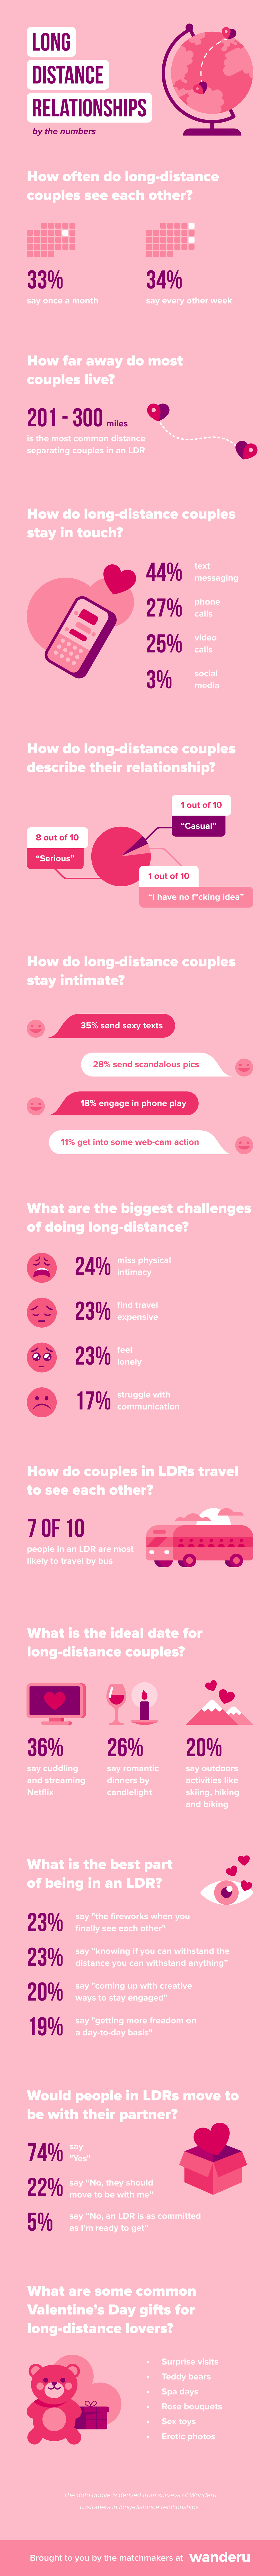 Valentine's Day infographic for people in long-distance relationships.